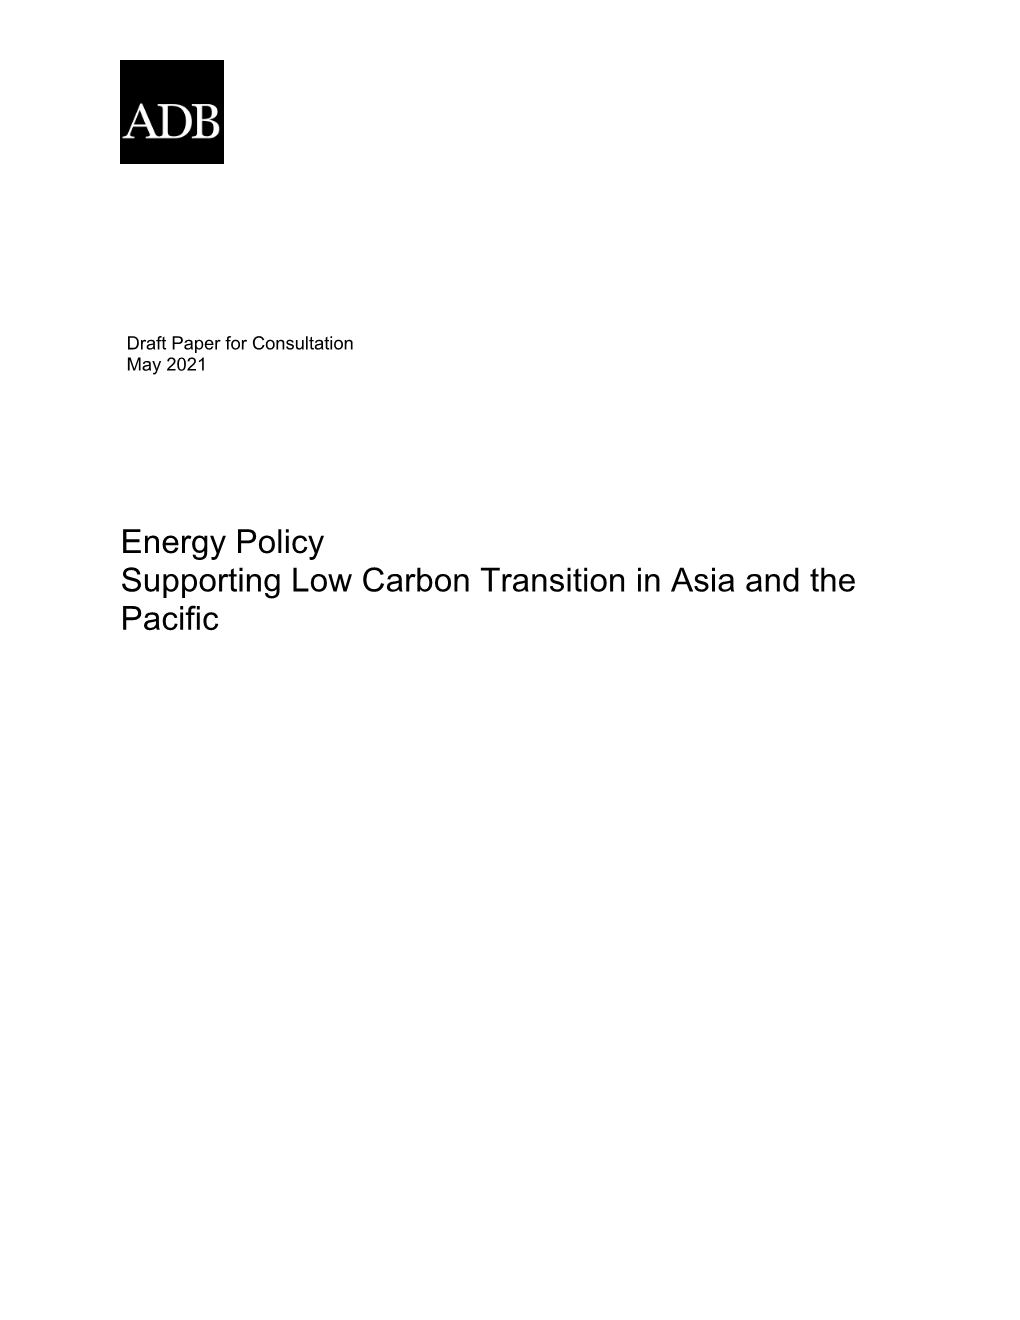 Supporting Low Carbon Transition in Asia and the Pacific